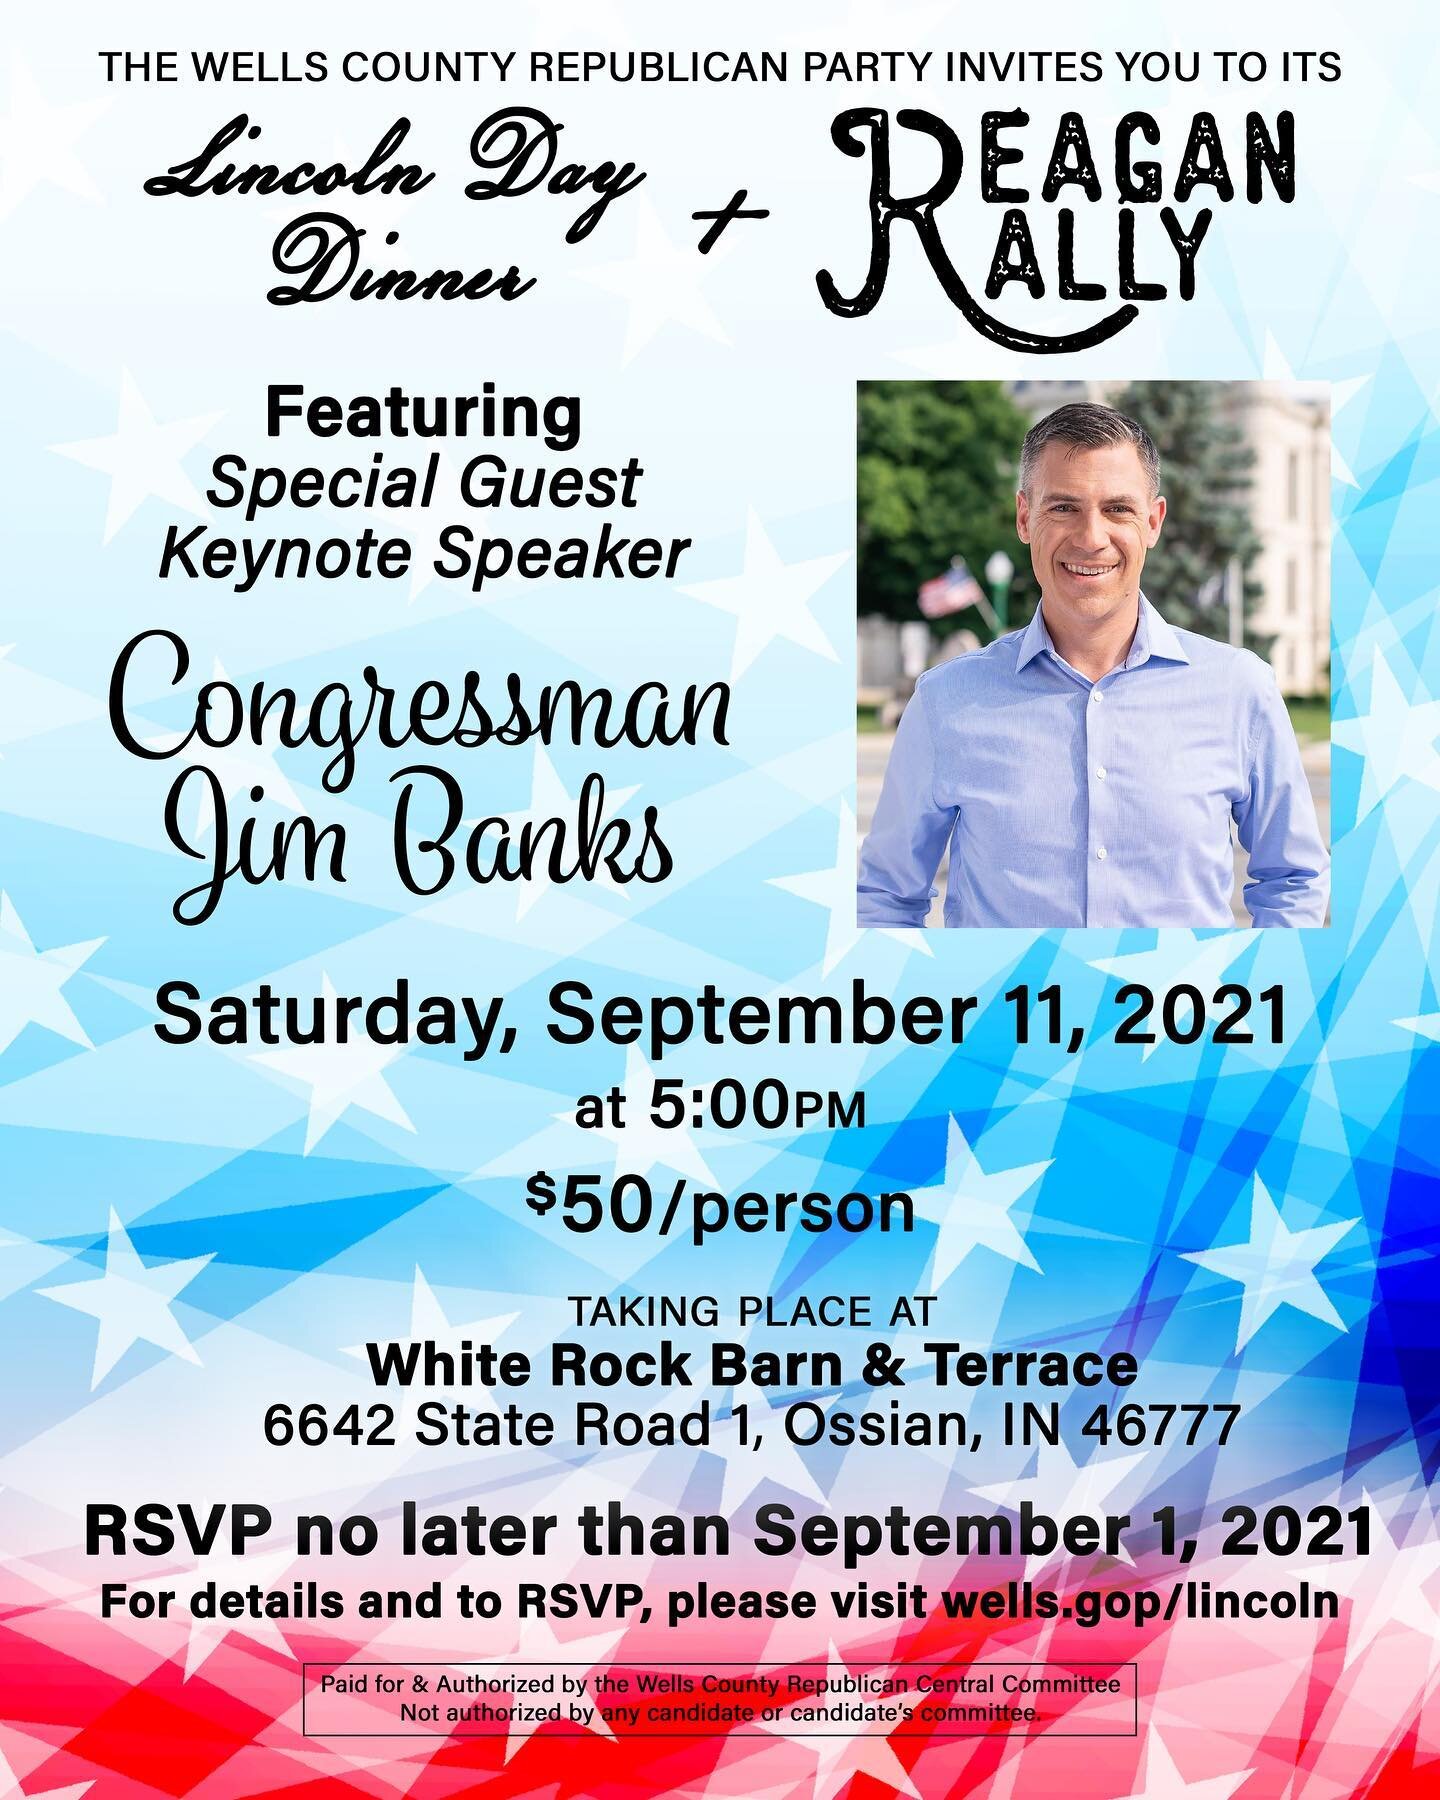 Join us on September 11 for our Lincoln Day Dinner &amp; Reagan Rally featuring Congressman @jim_banks! RSVP information is on our website!